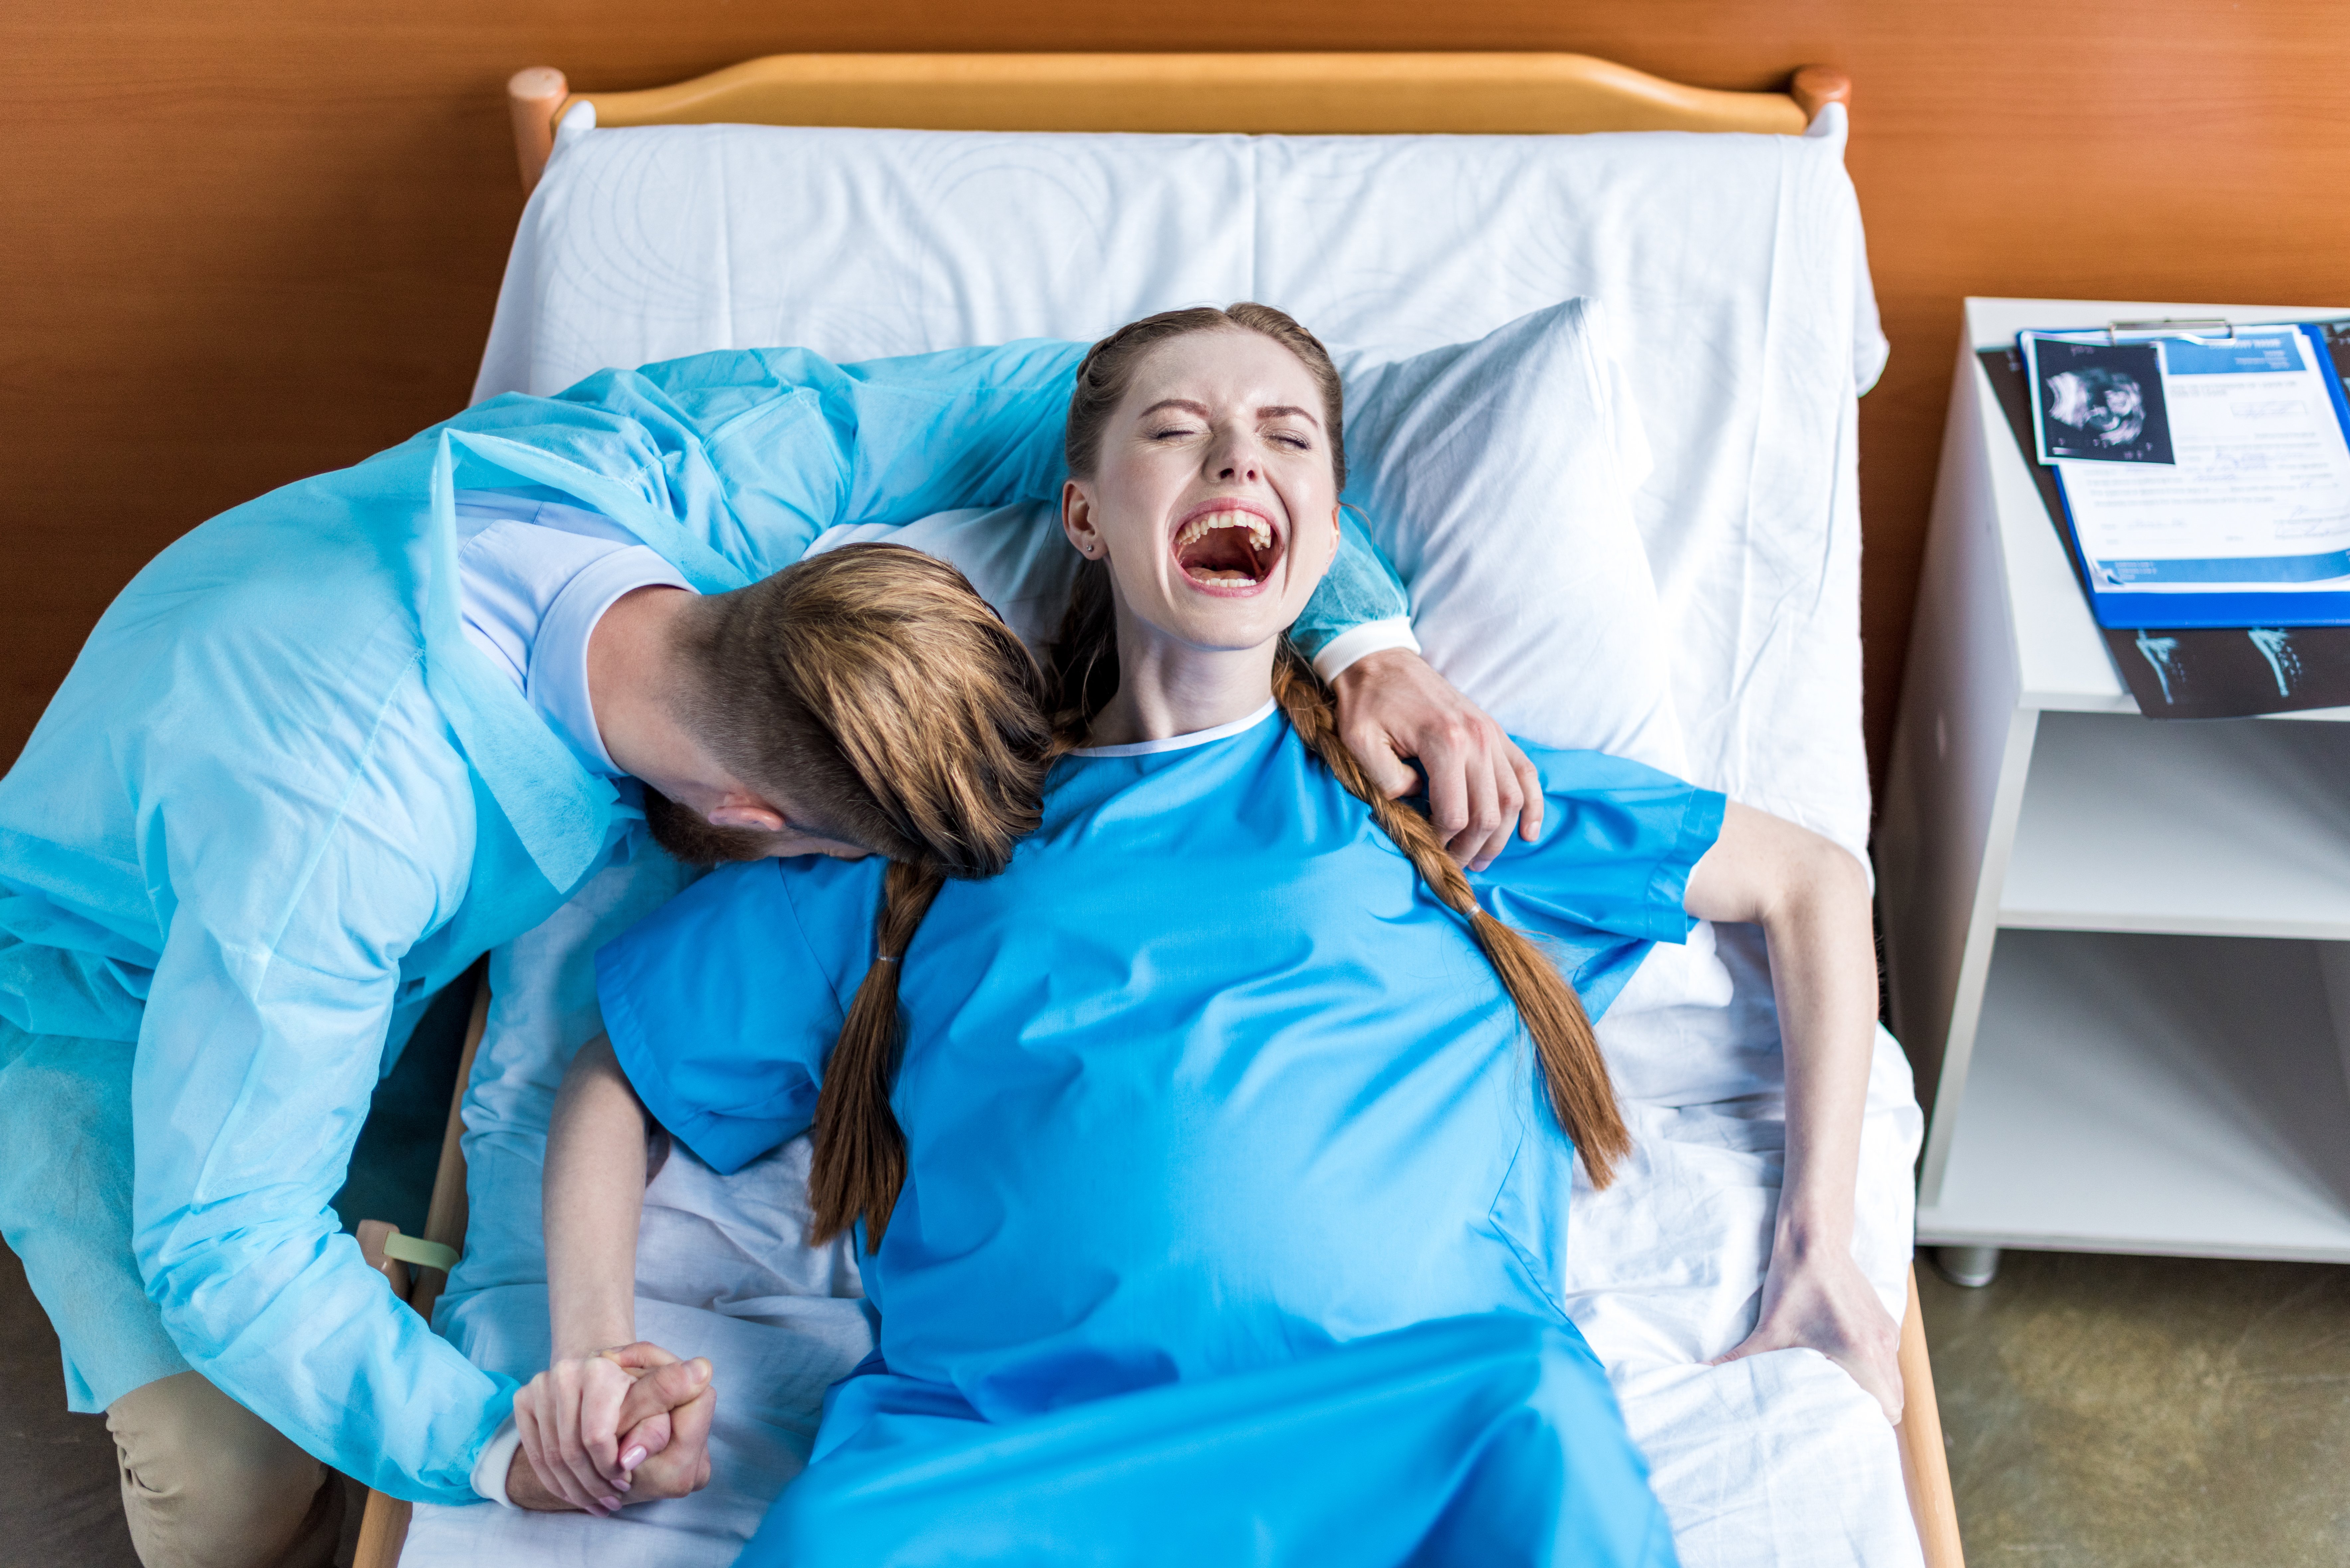 Woman giving birth in hospital | Photo: Shutterstock